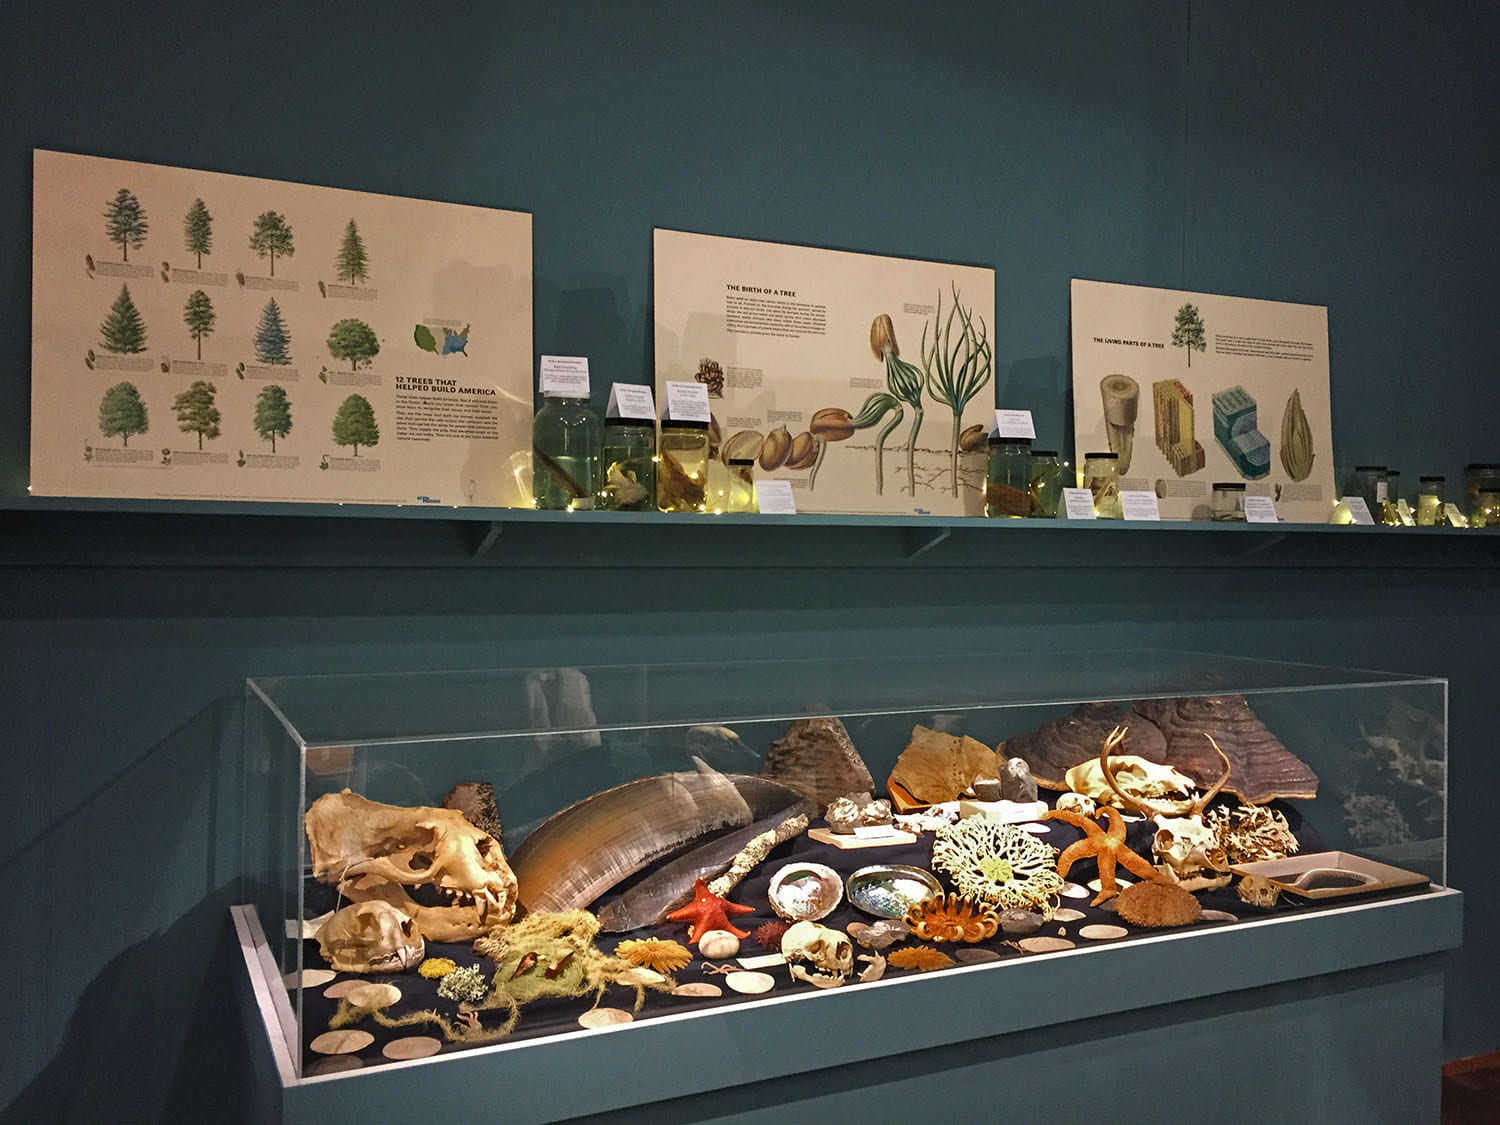 display case full of dead sea life. Above it is a shelf holding labeled jars and diagrams depicting species of plant life